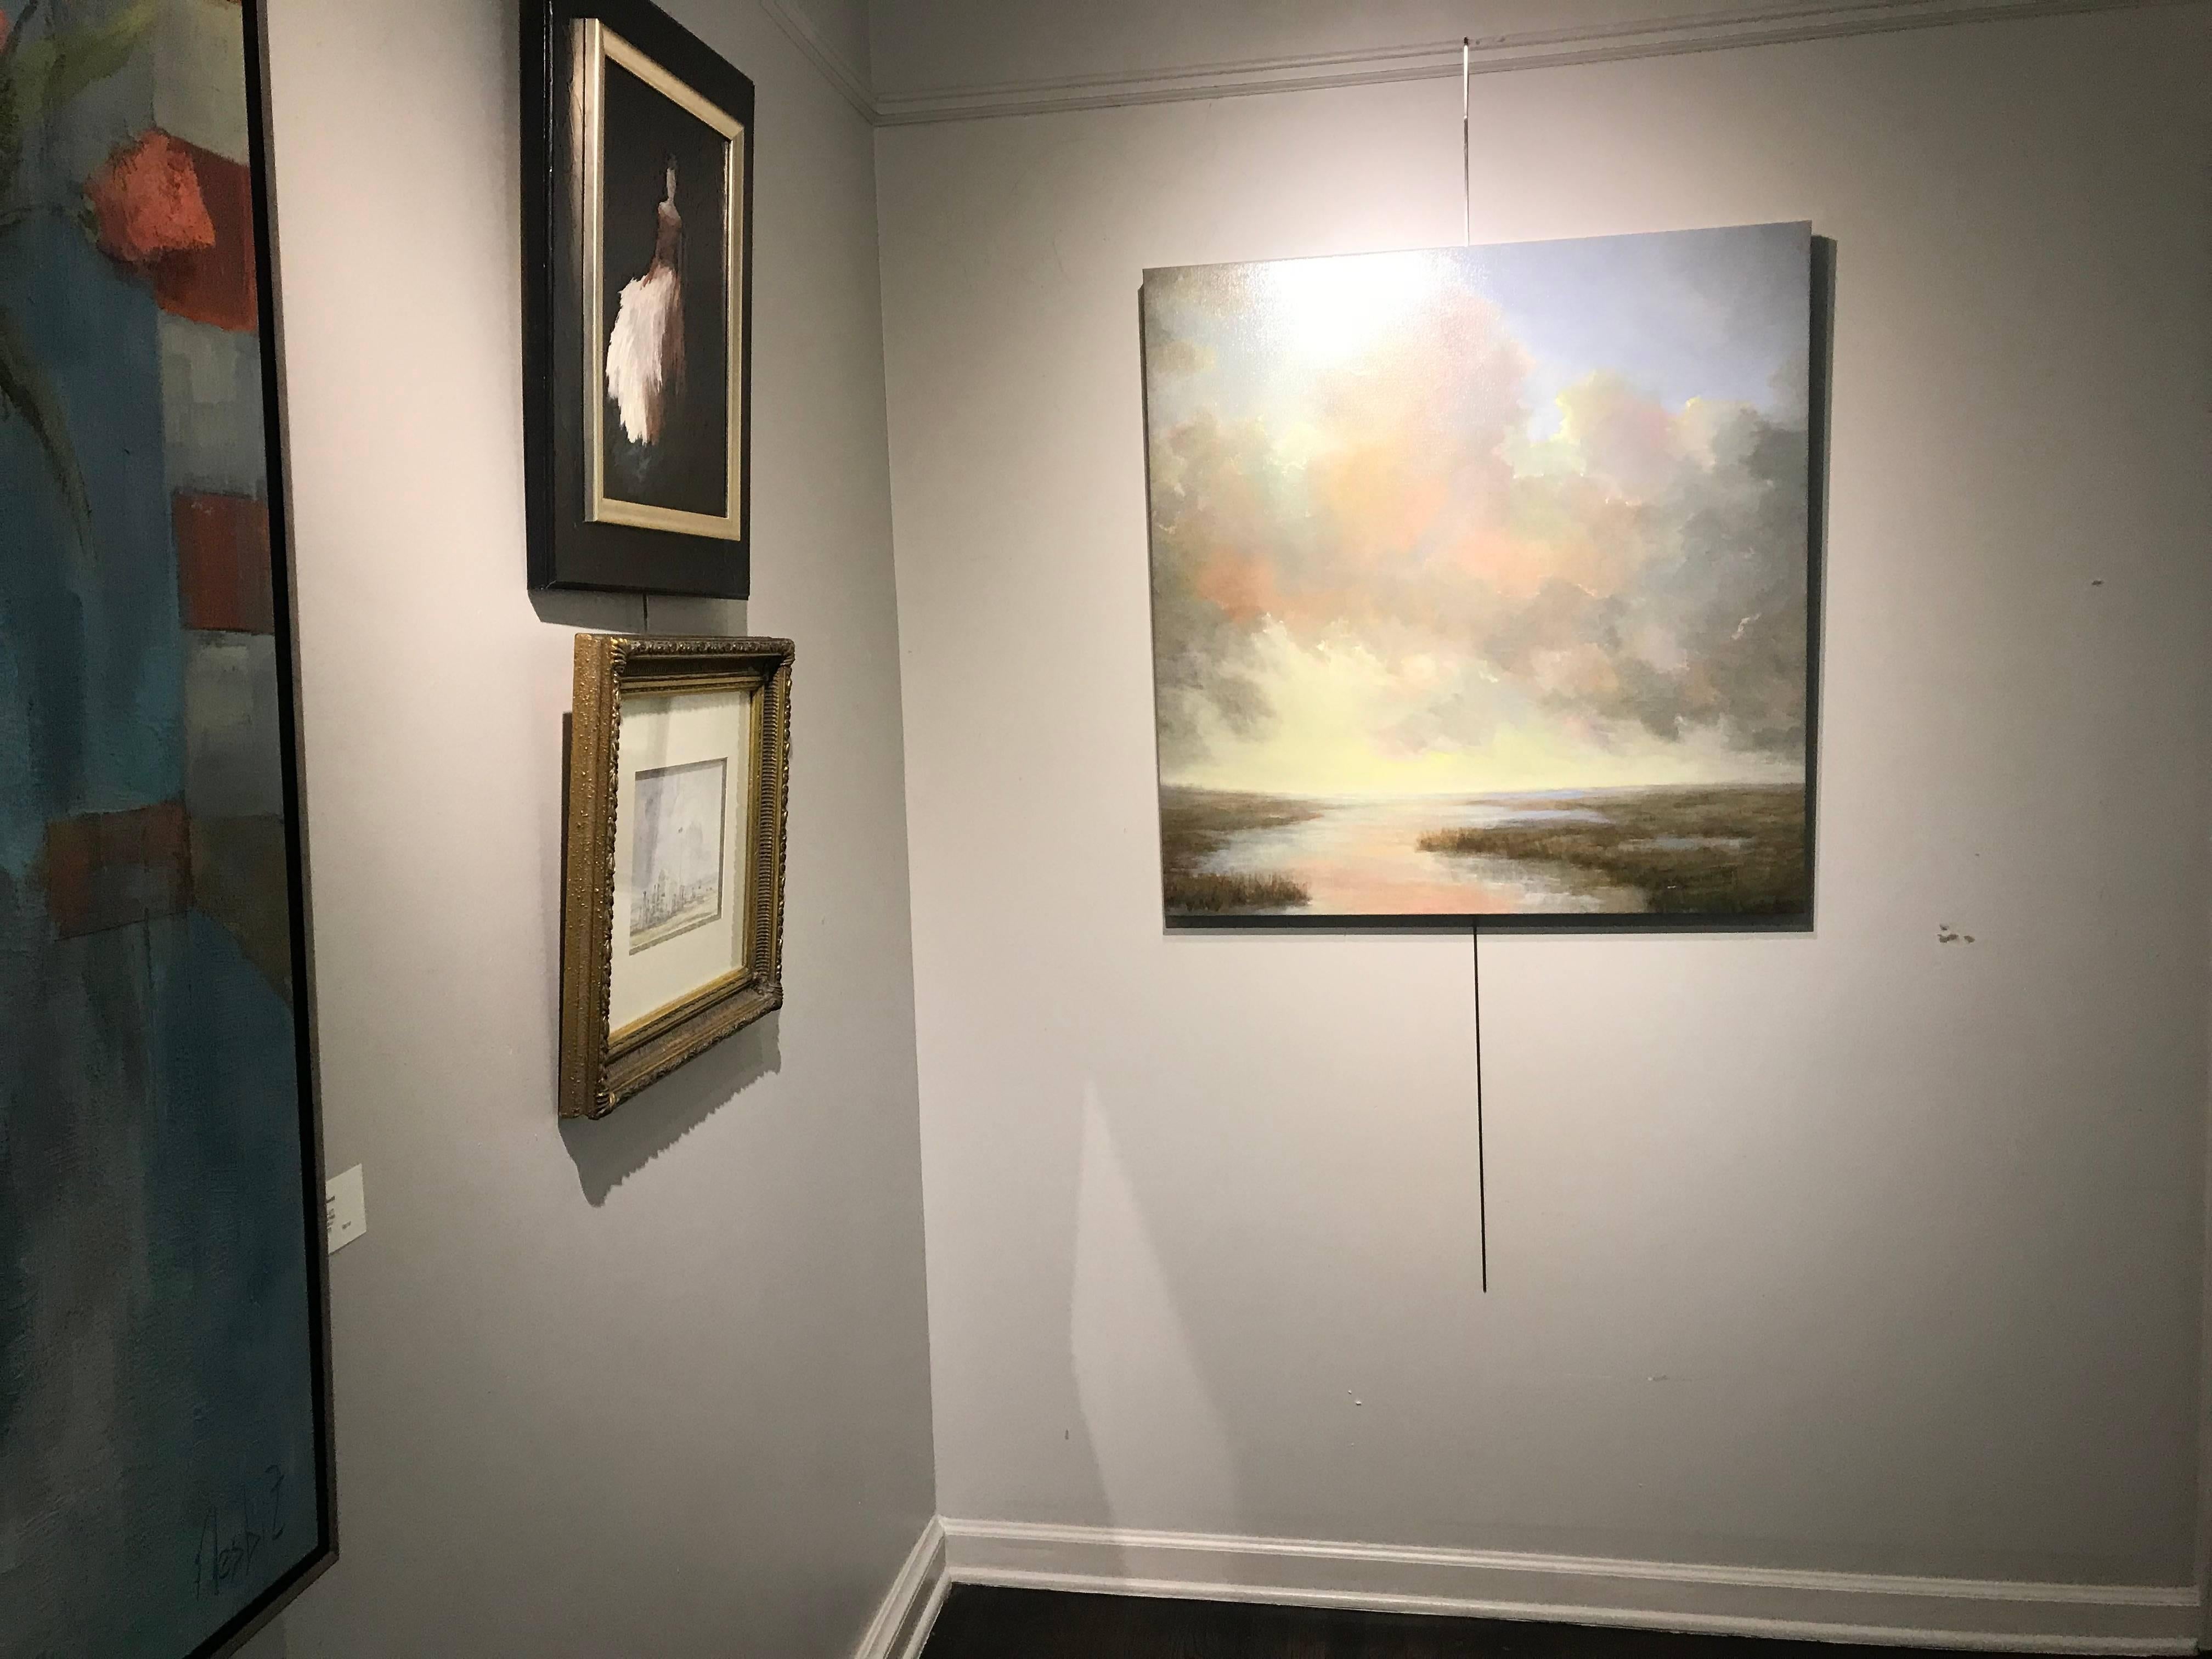 'Elevation' is a Post-Impressionist oil on canvas landscape painting created by American artist Julie Houck in 2018. Occupying a great portion of the composition, a cloudy sky reflects its delicate colors into the water depicted below. The scene is